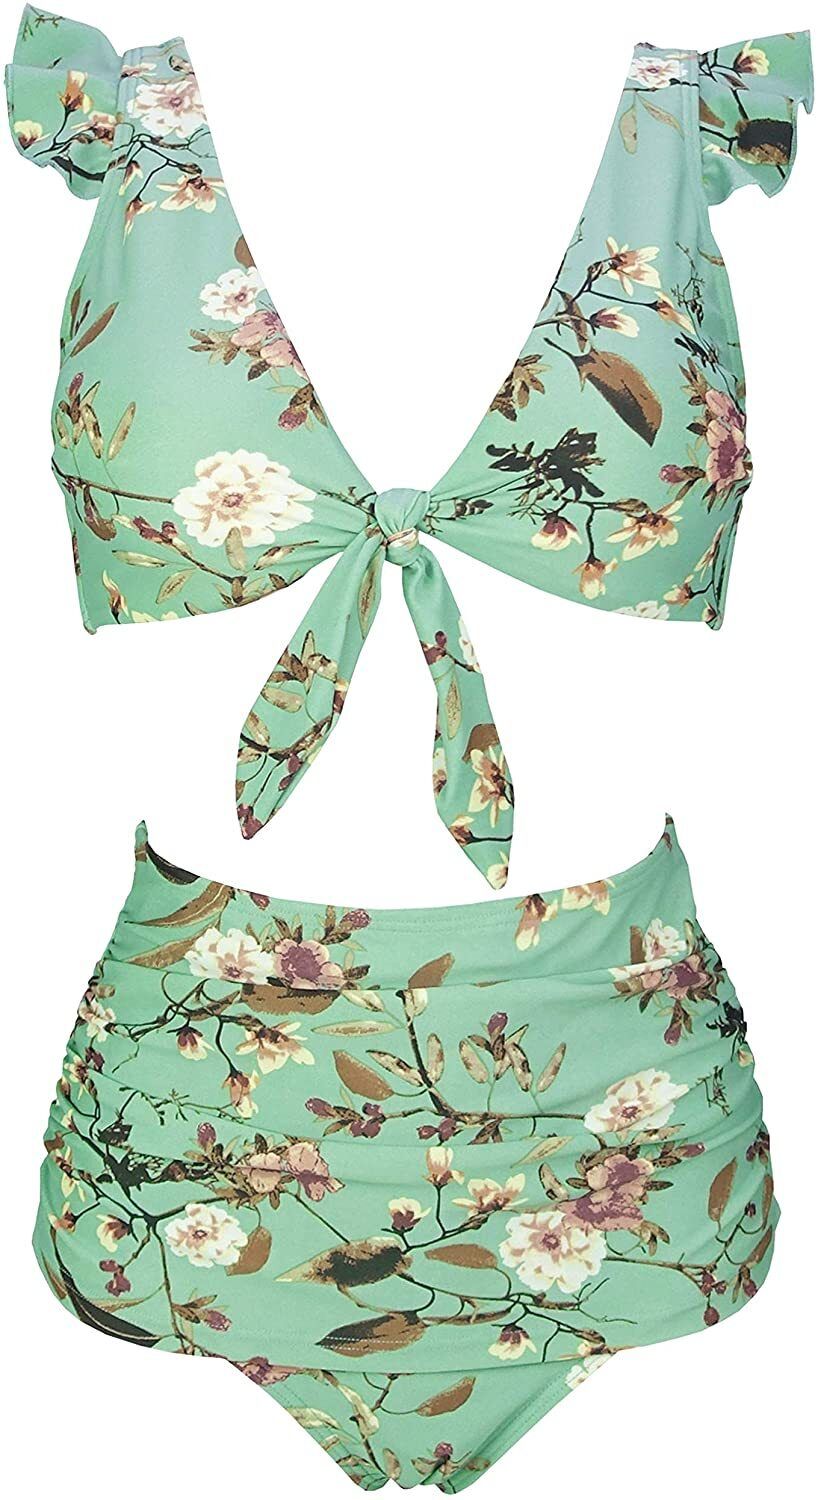 36 Unique Bathing Suits That'll Make You Feel Great At The Pool ...